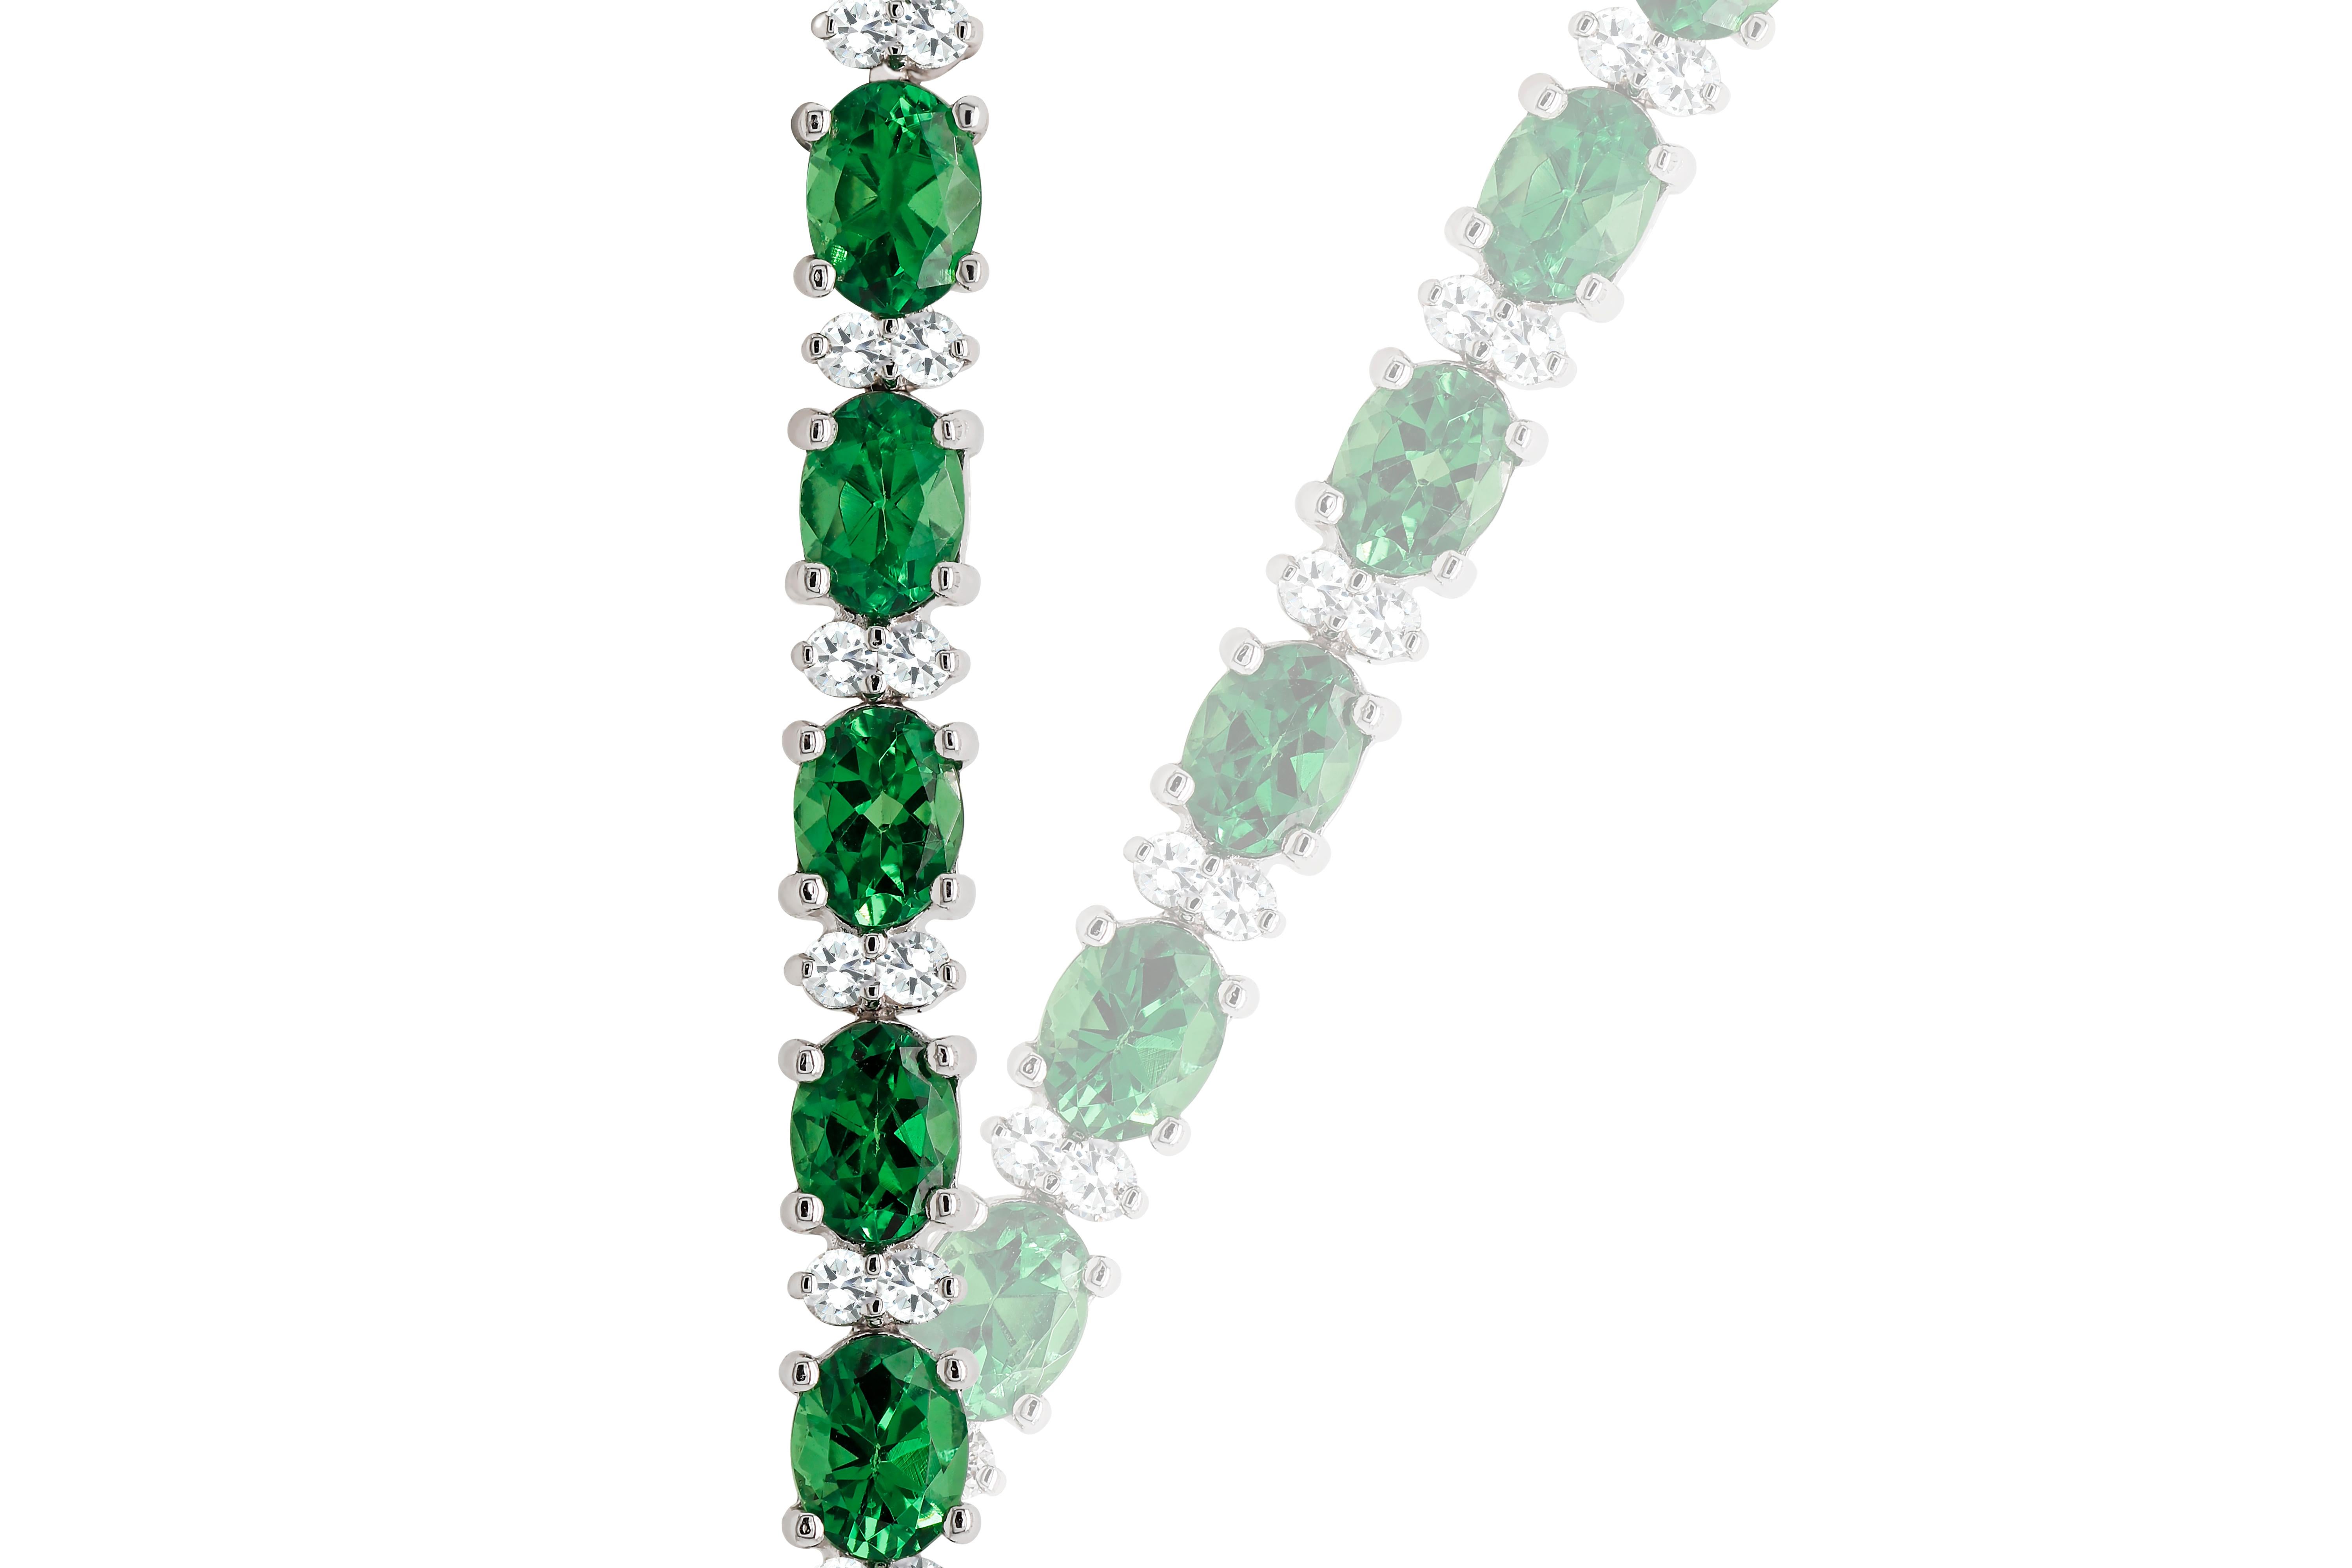 A fabulous grassy green Tsavorite and diamond solitaire tennis bracelet in 18K Gold.

Each Tsavorite is spaced by two sparkling diamonds which highlights make them more glorious and vibrant in their look. A delicate heart-shaped clasp completes the